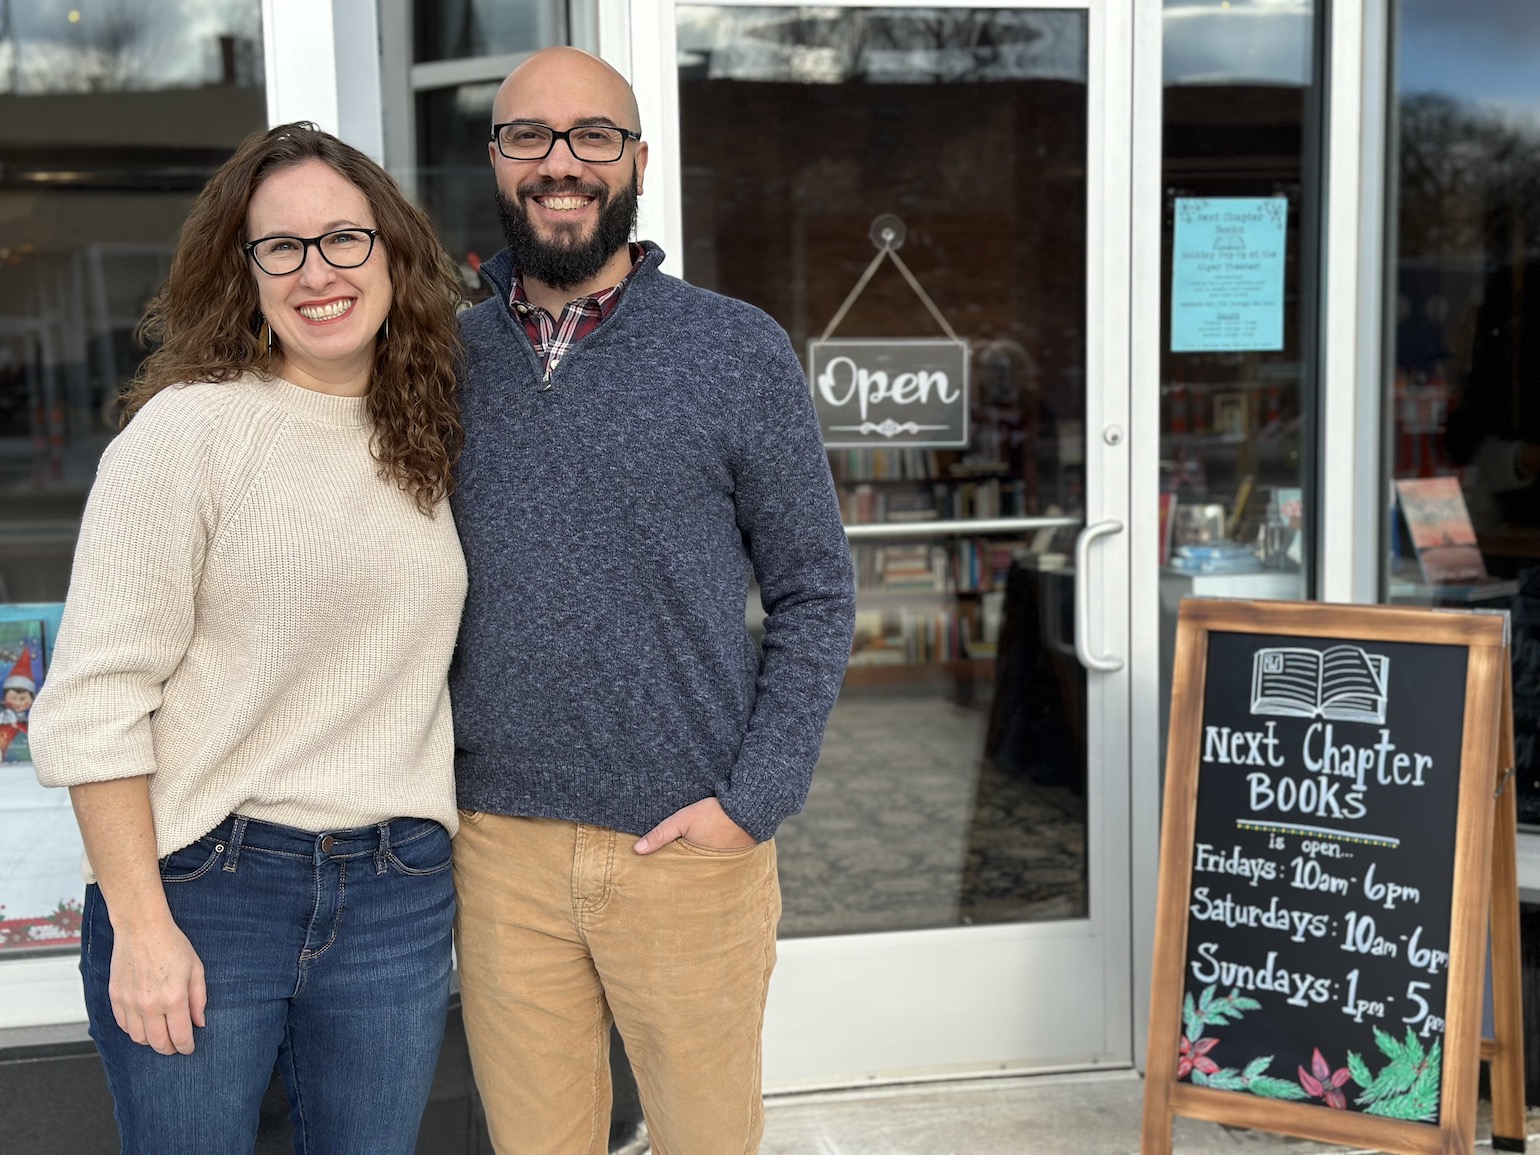  Jay (right) and Sarah Williams in front of Next Chapter Books' storefront on Detroit's East Side